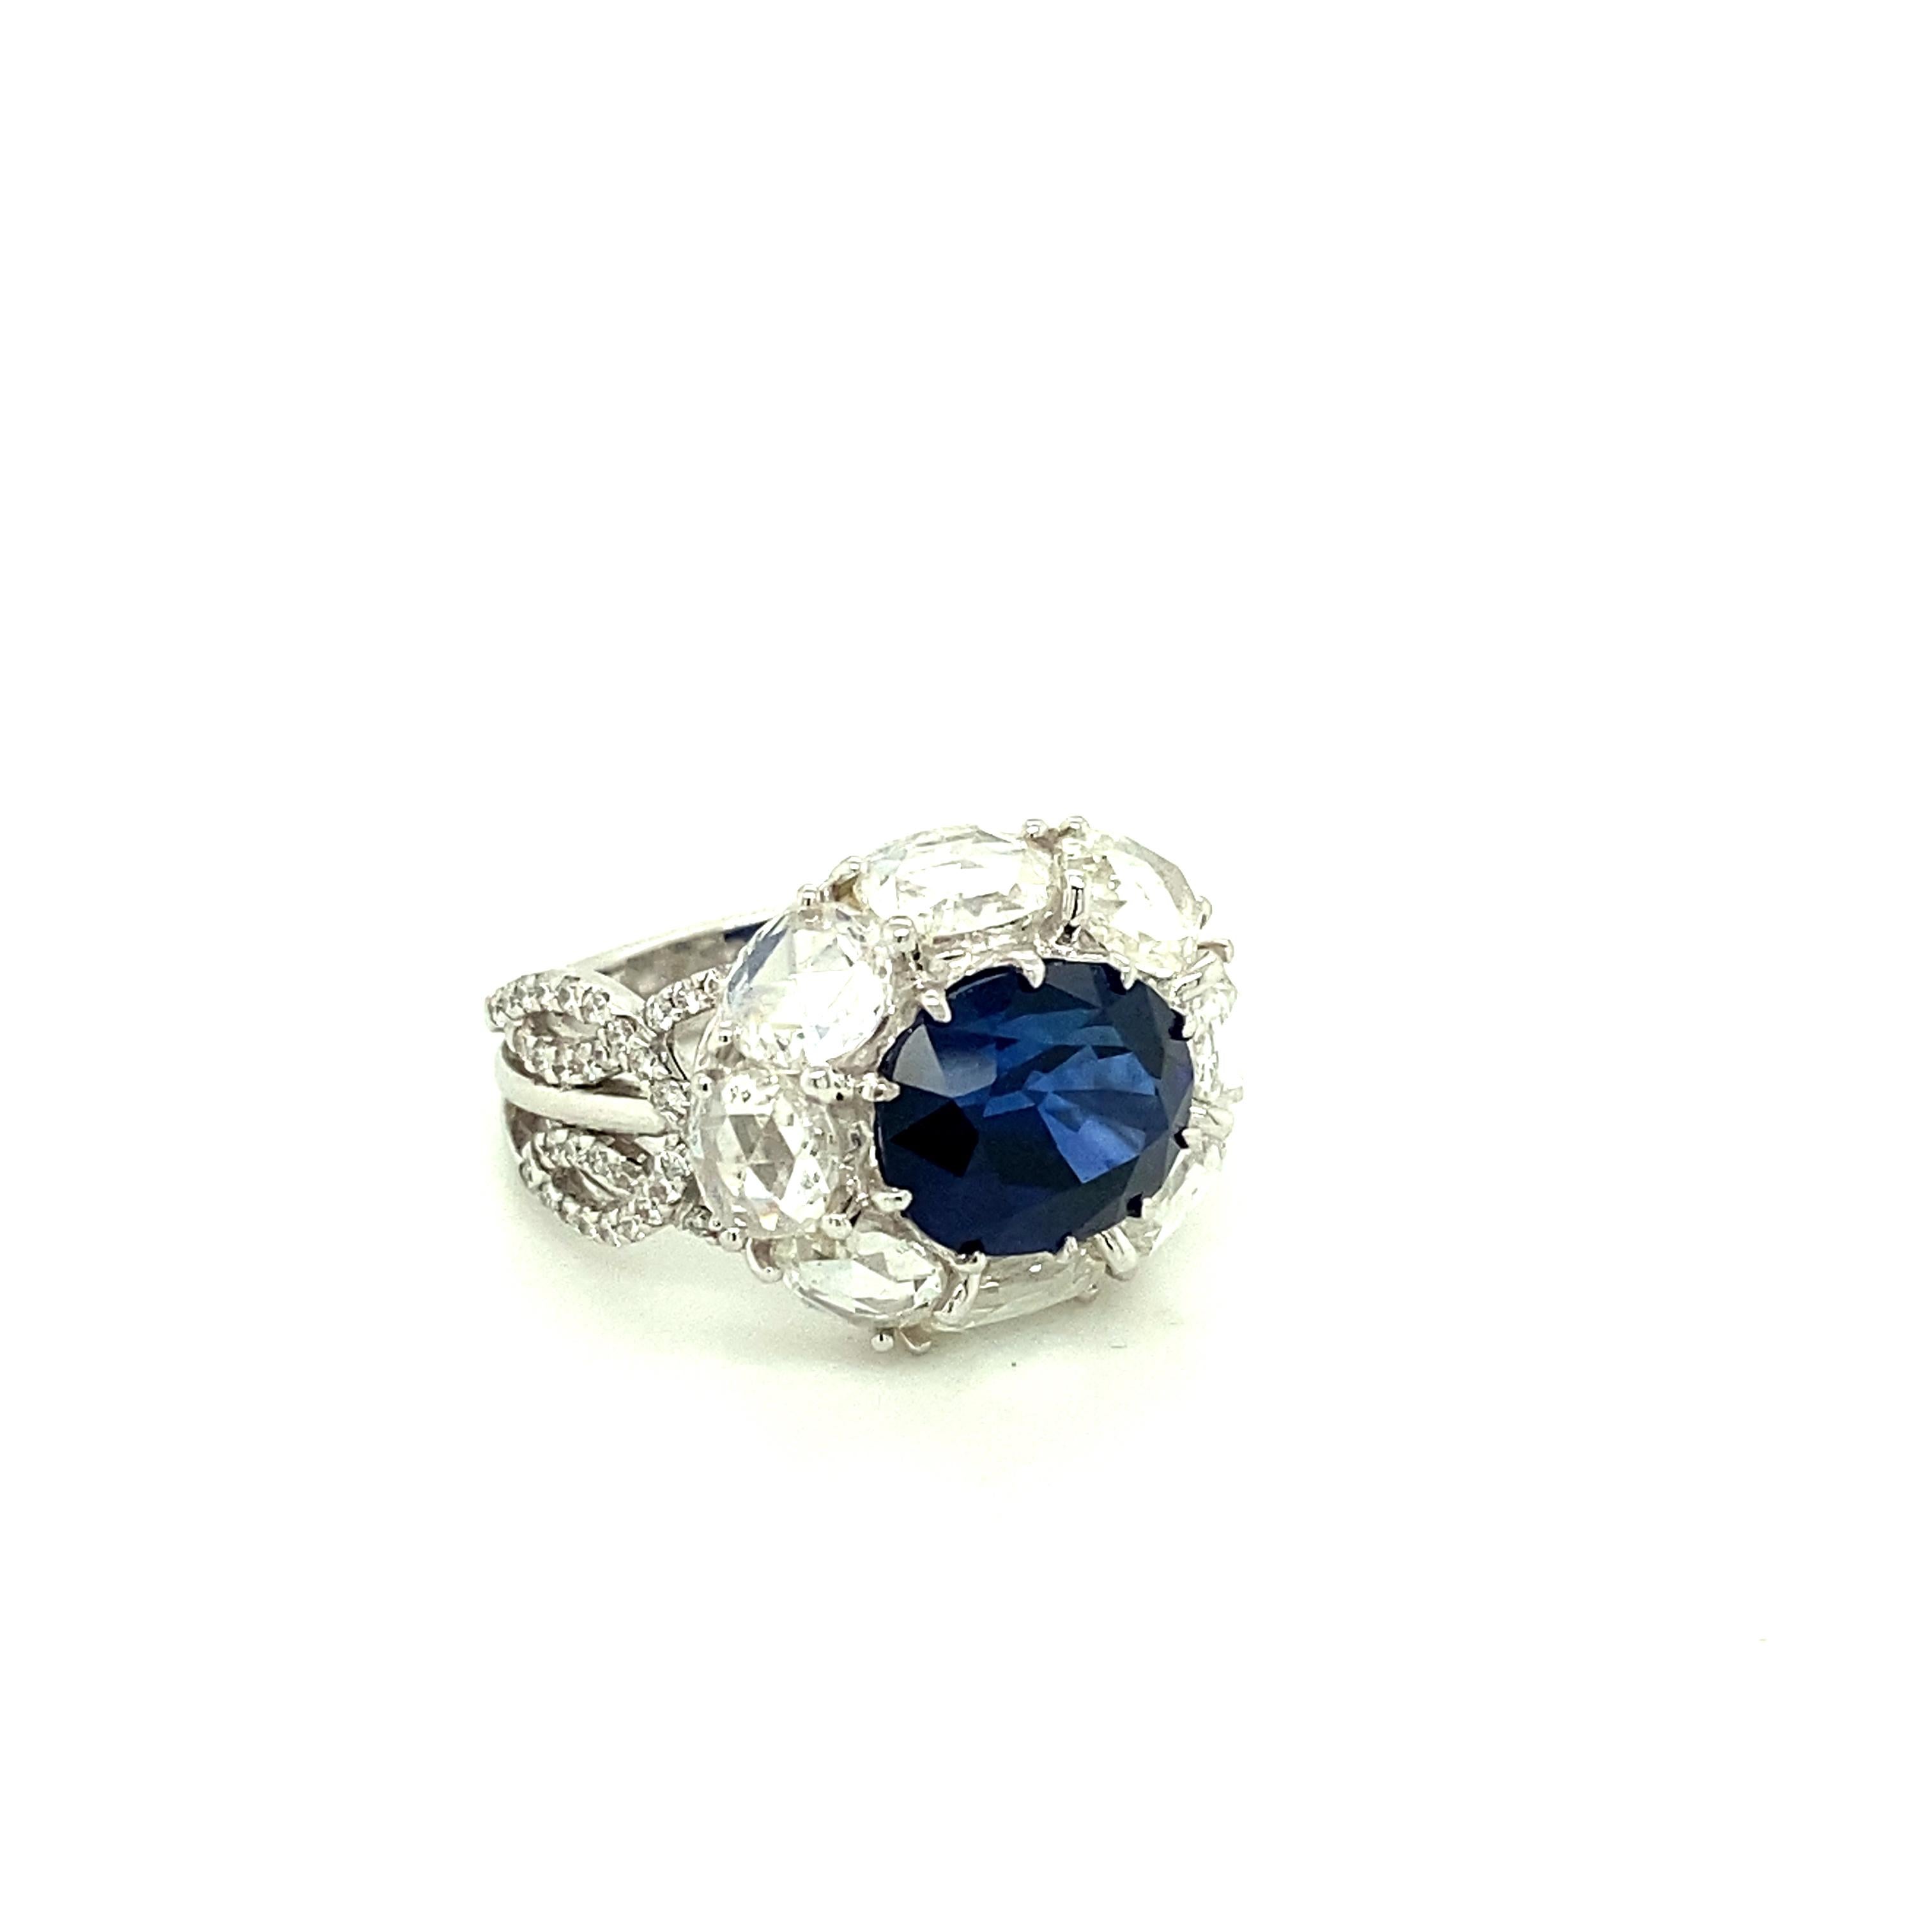 5 Carat GRS Certified Royal Blue Sapphire and White Diamond Gold Engagement Ring:

A stunning ring, it features a gorgeous GRS certified royal blue oval-cut sapphire weighing 5 carat surrounded by a halo of white rose-cut diamonds weighing 3.28